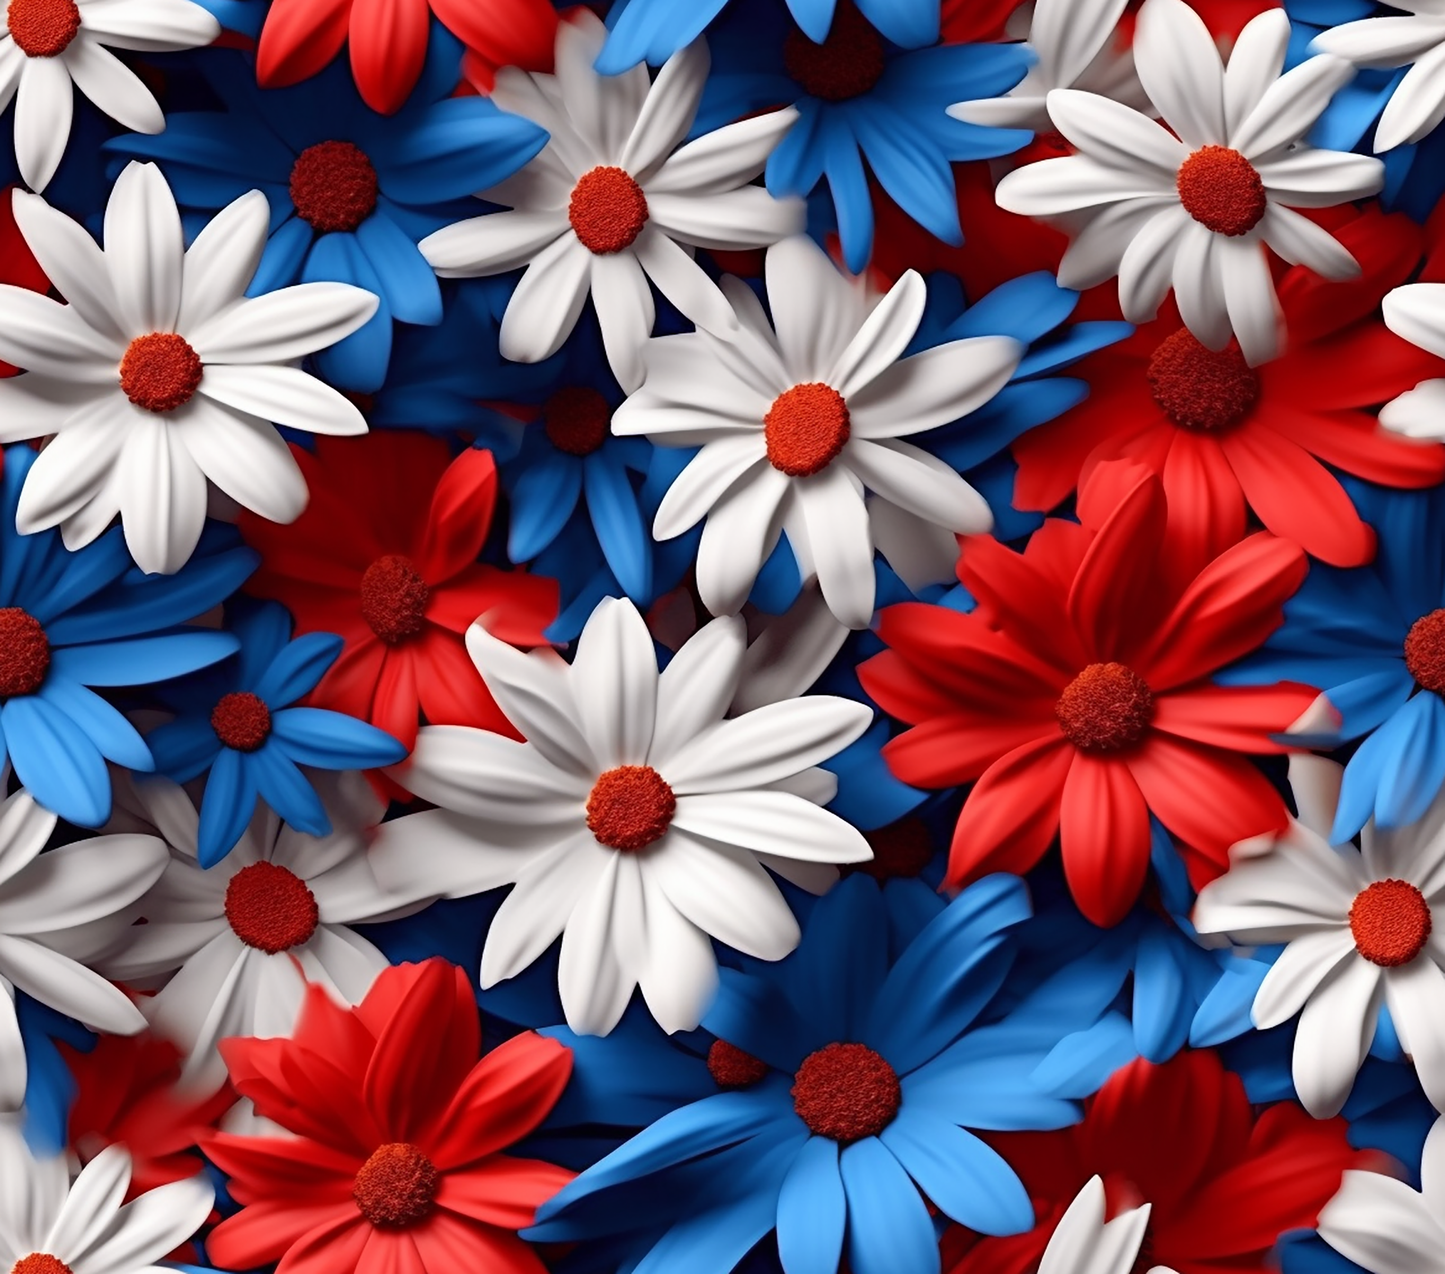 3D SEAMLESS PATRIOTIC RED, WHITE AND BLUE DAISY